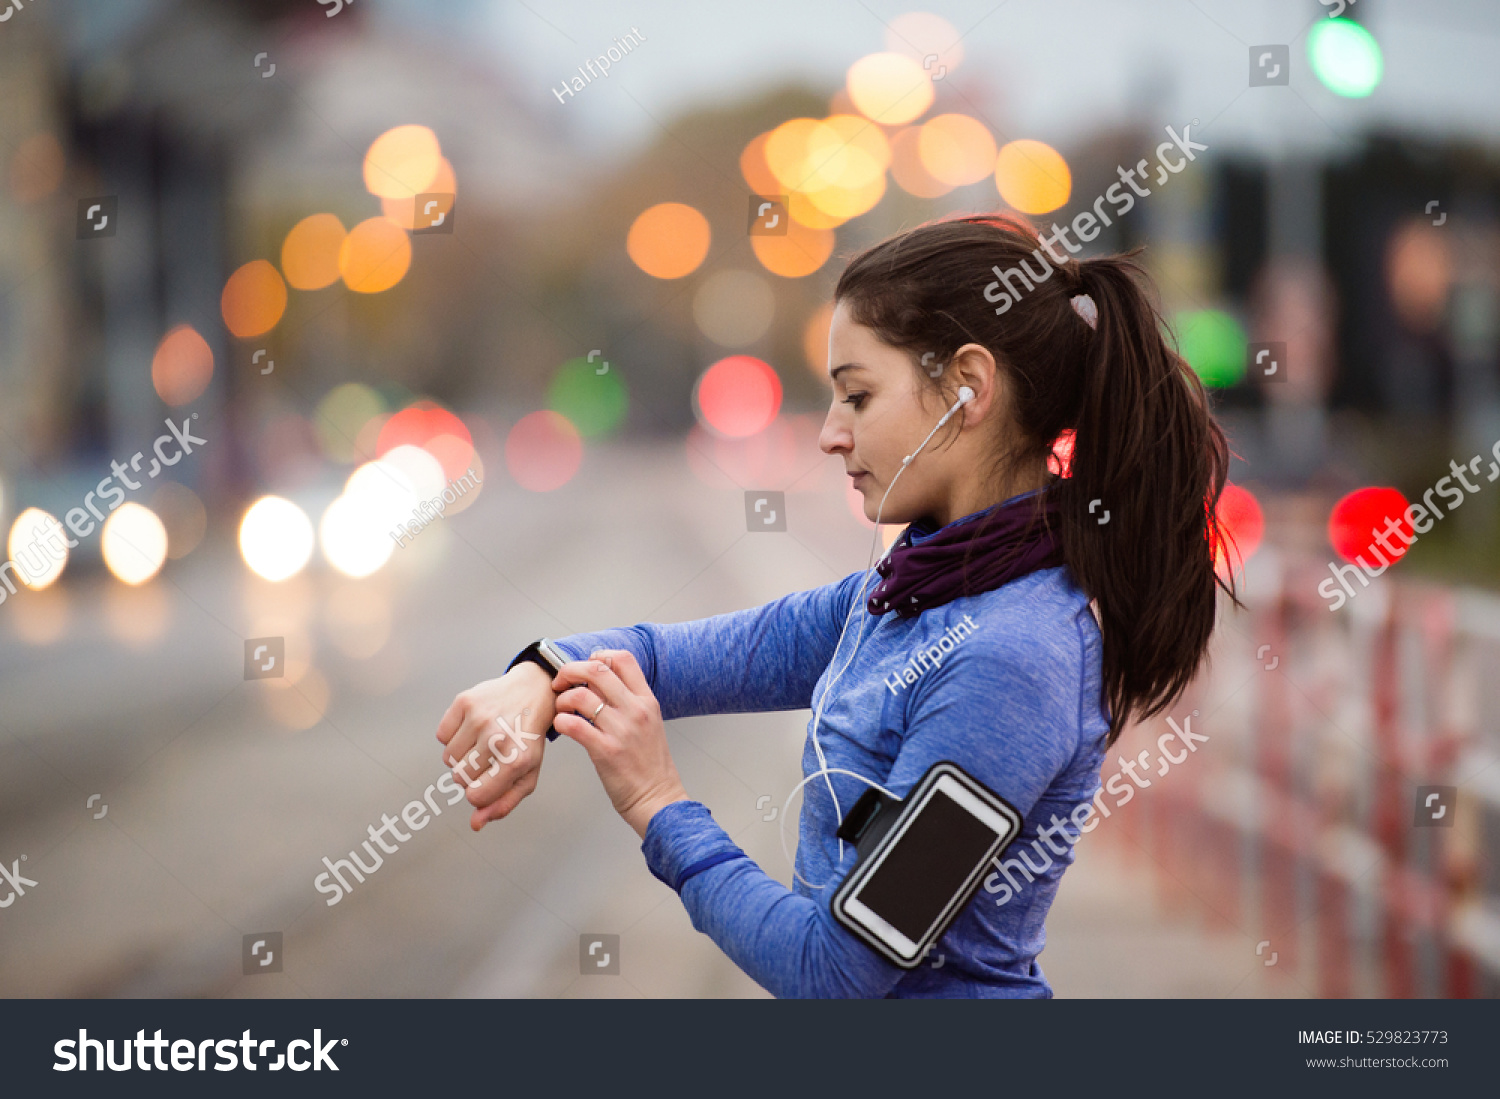 Young woman in blue sweatshirt running in the city #529823773